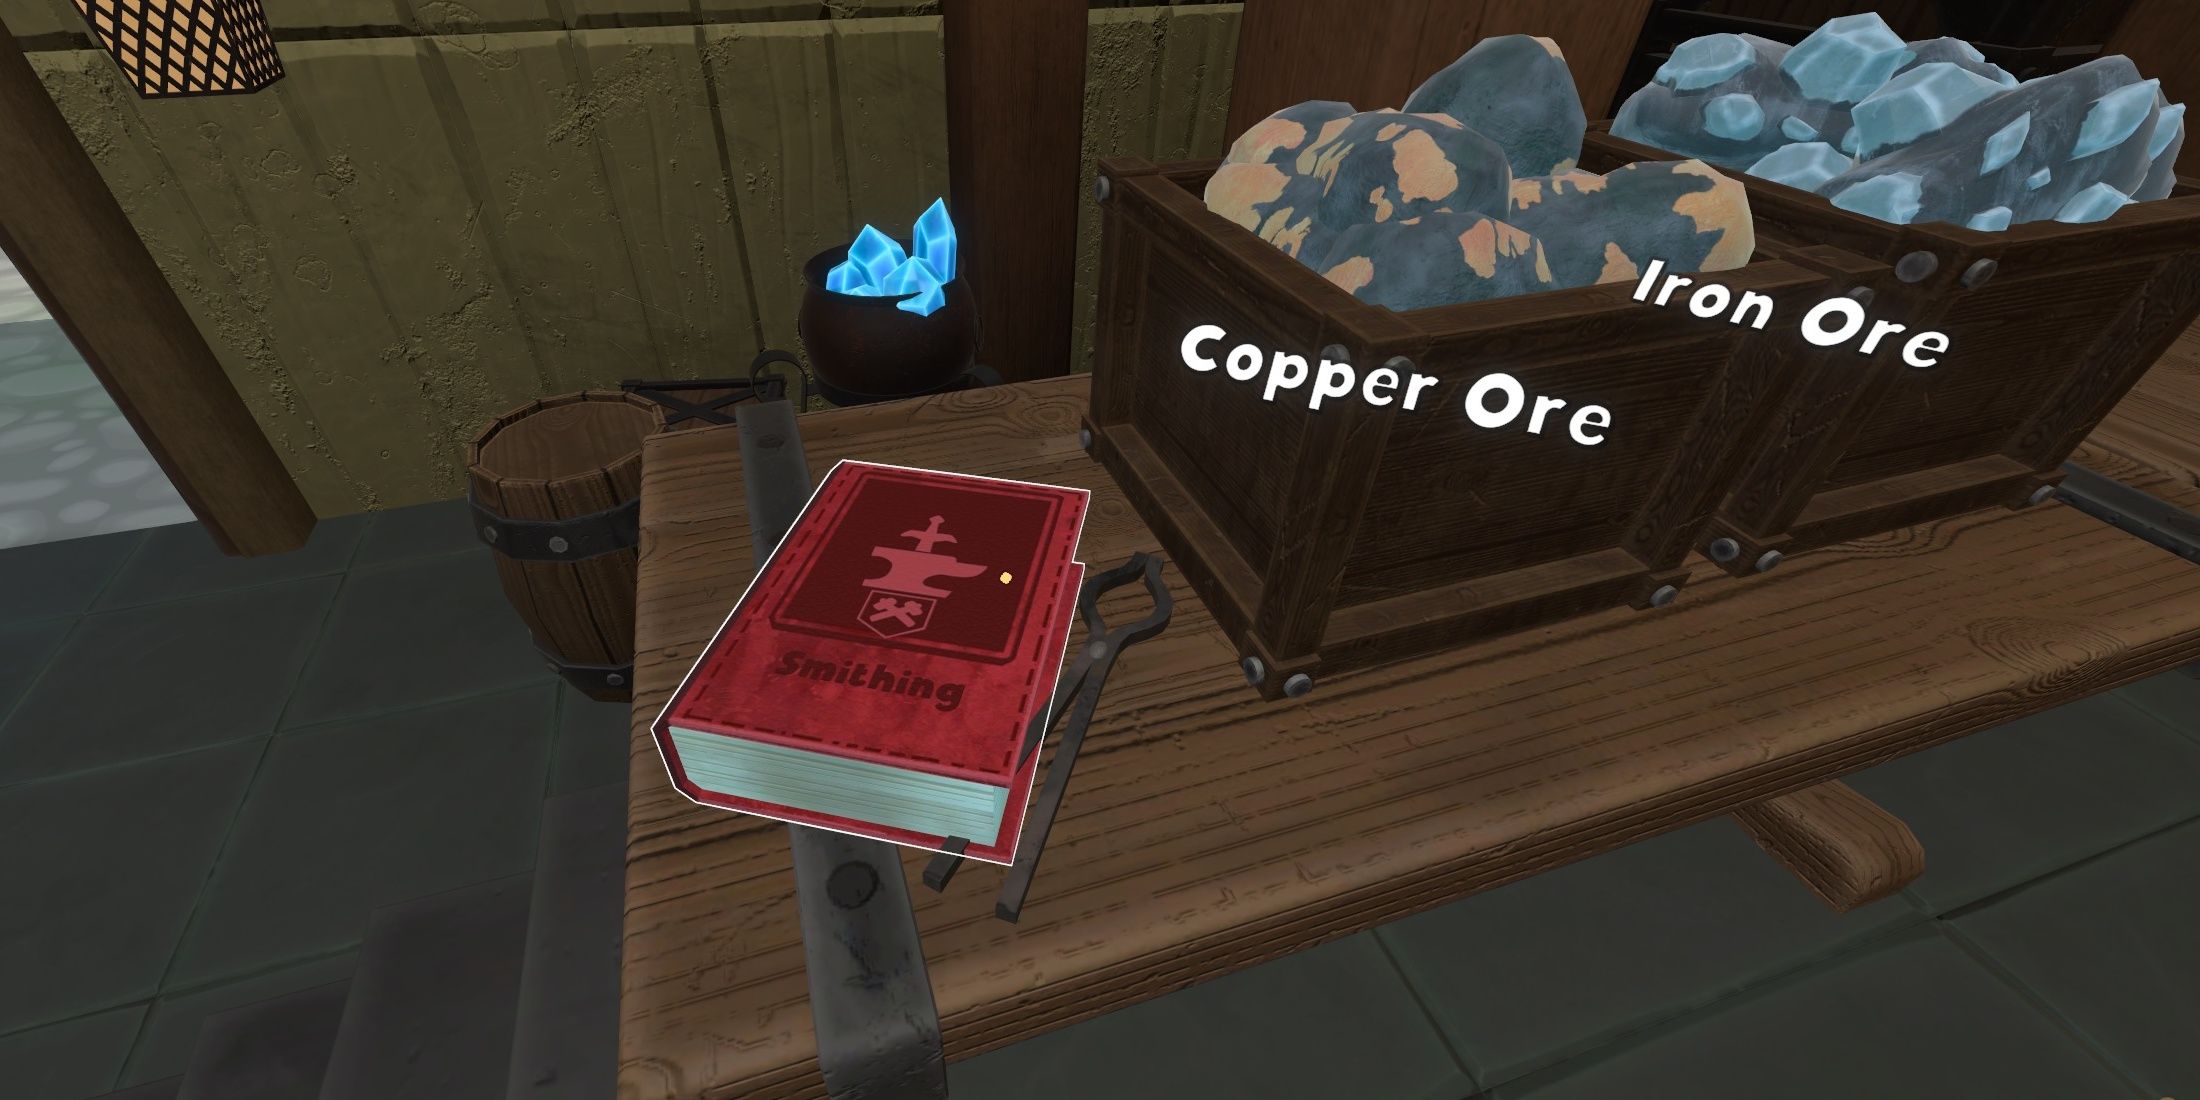 If you want to be fully informed about the mechanics you should know, look for these red tomes